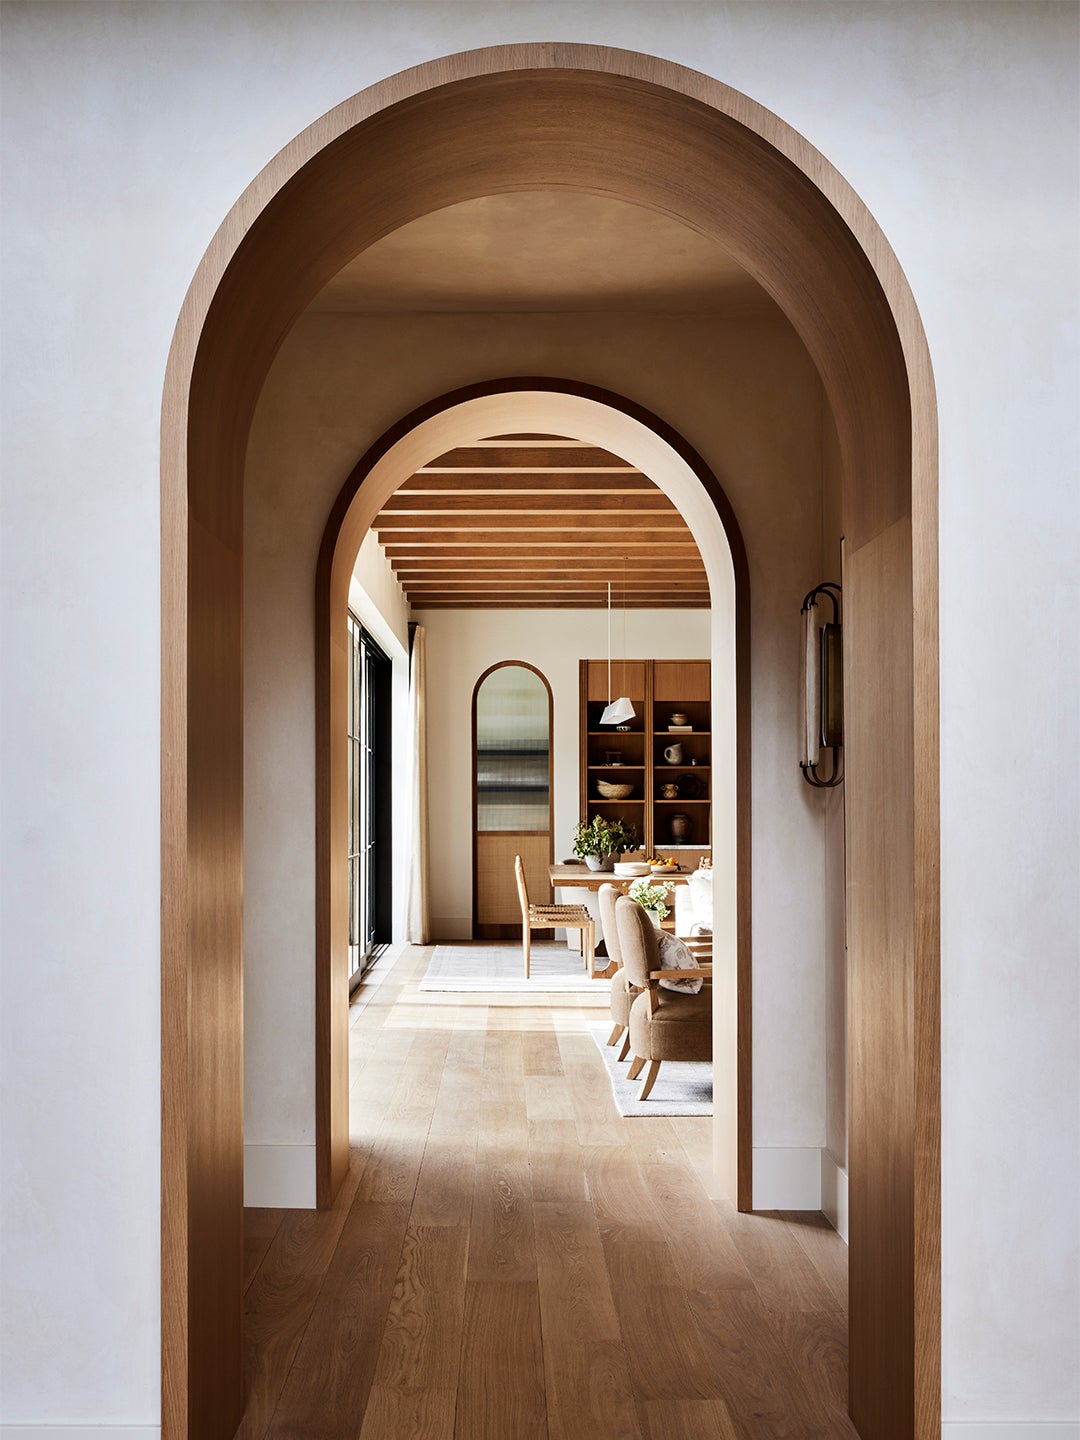 Arched hallway looking into dining room